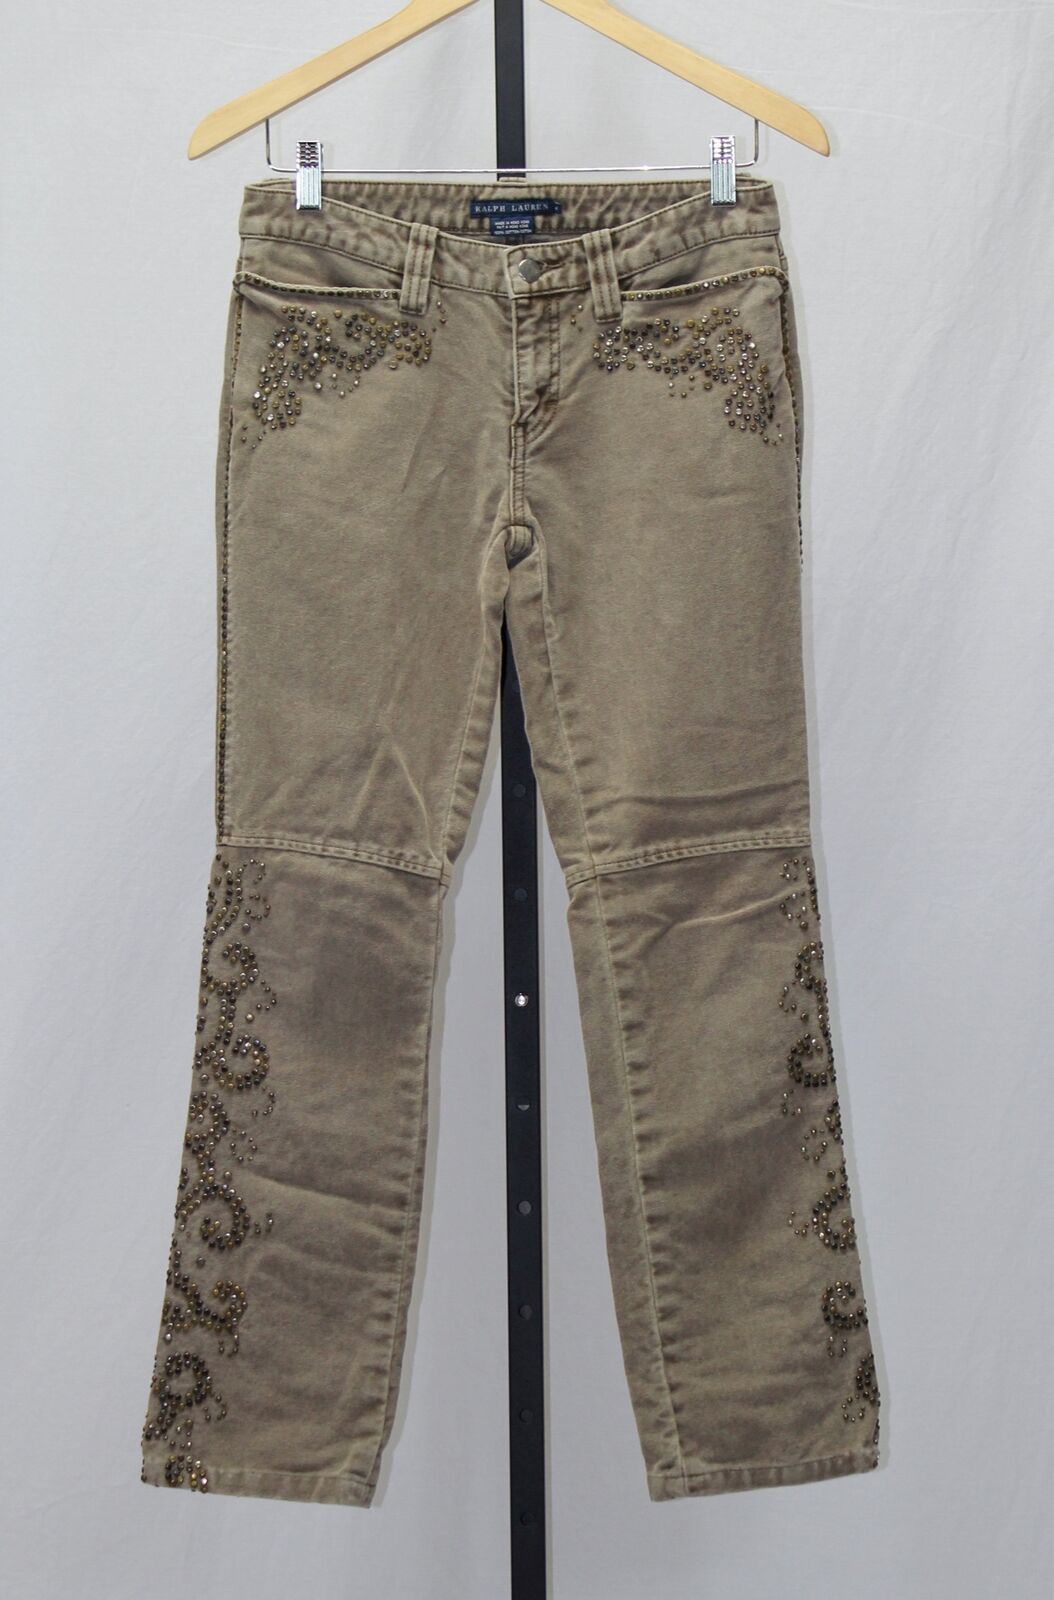 Ralph Max 71% OFF Lauren Blue Label Tan Pants New mail order Studded 4 Size Jeans